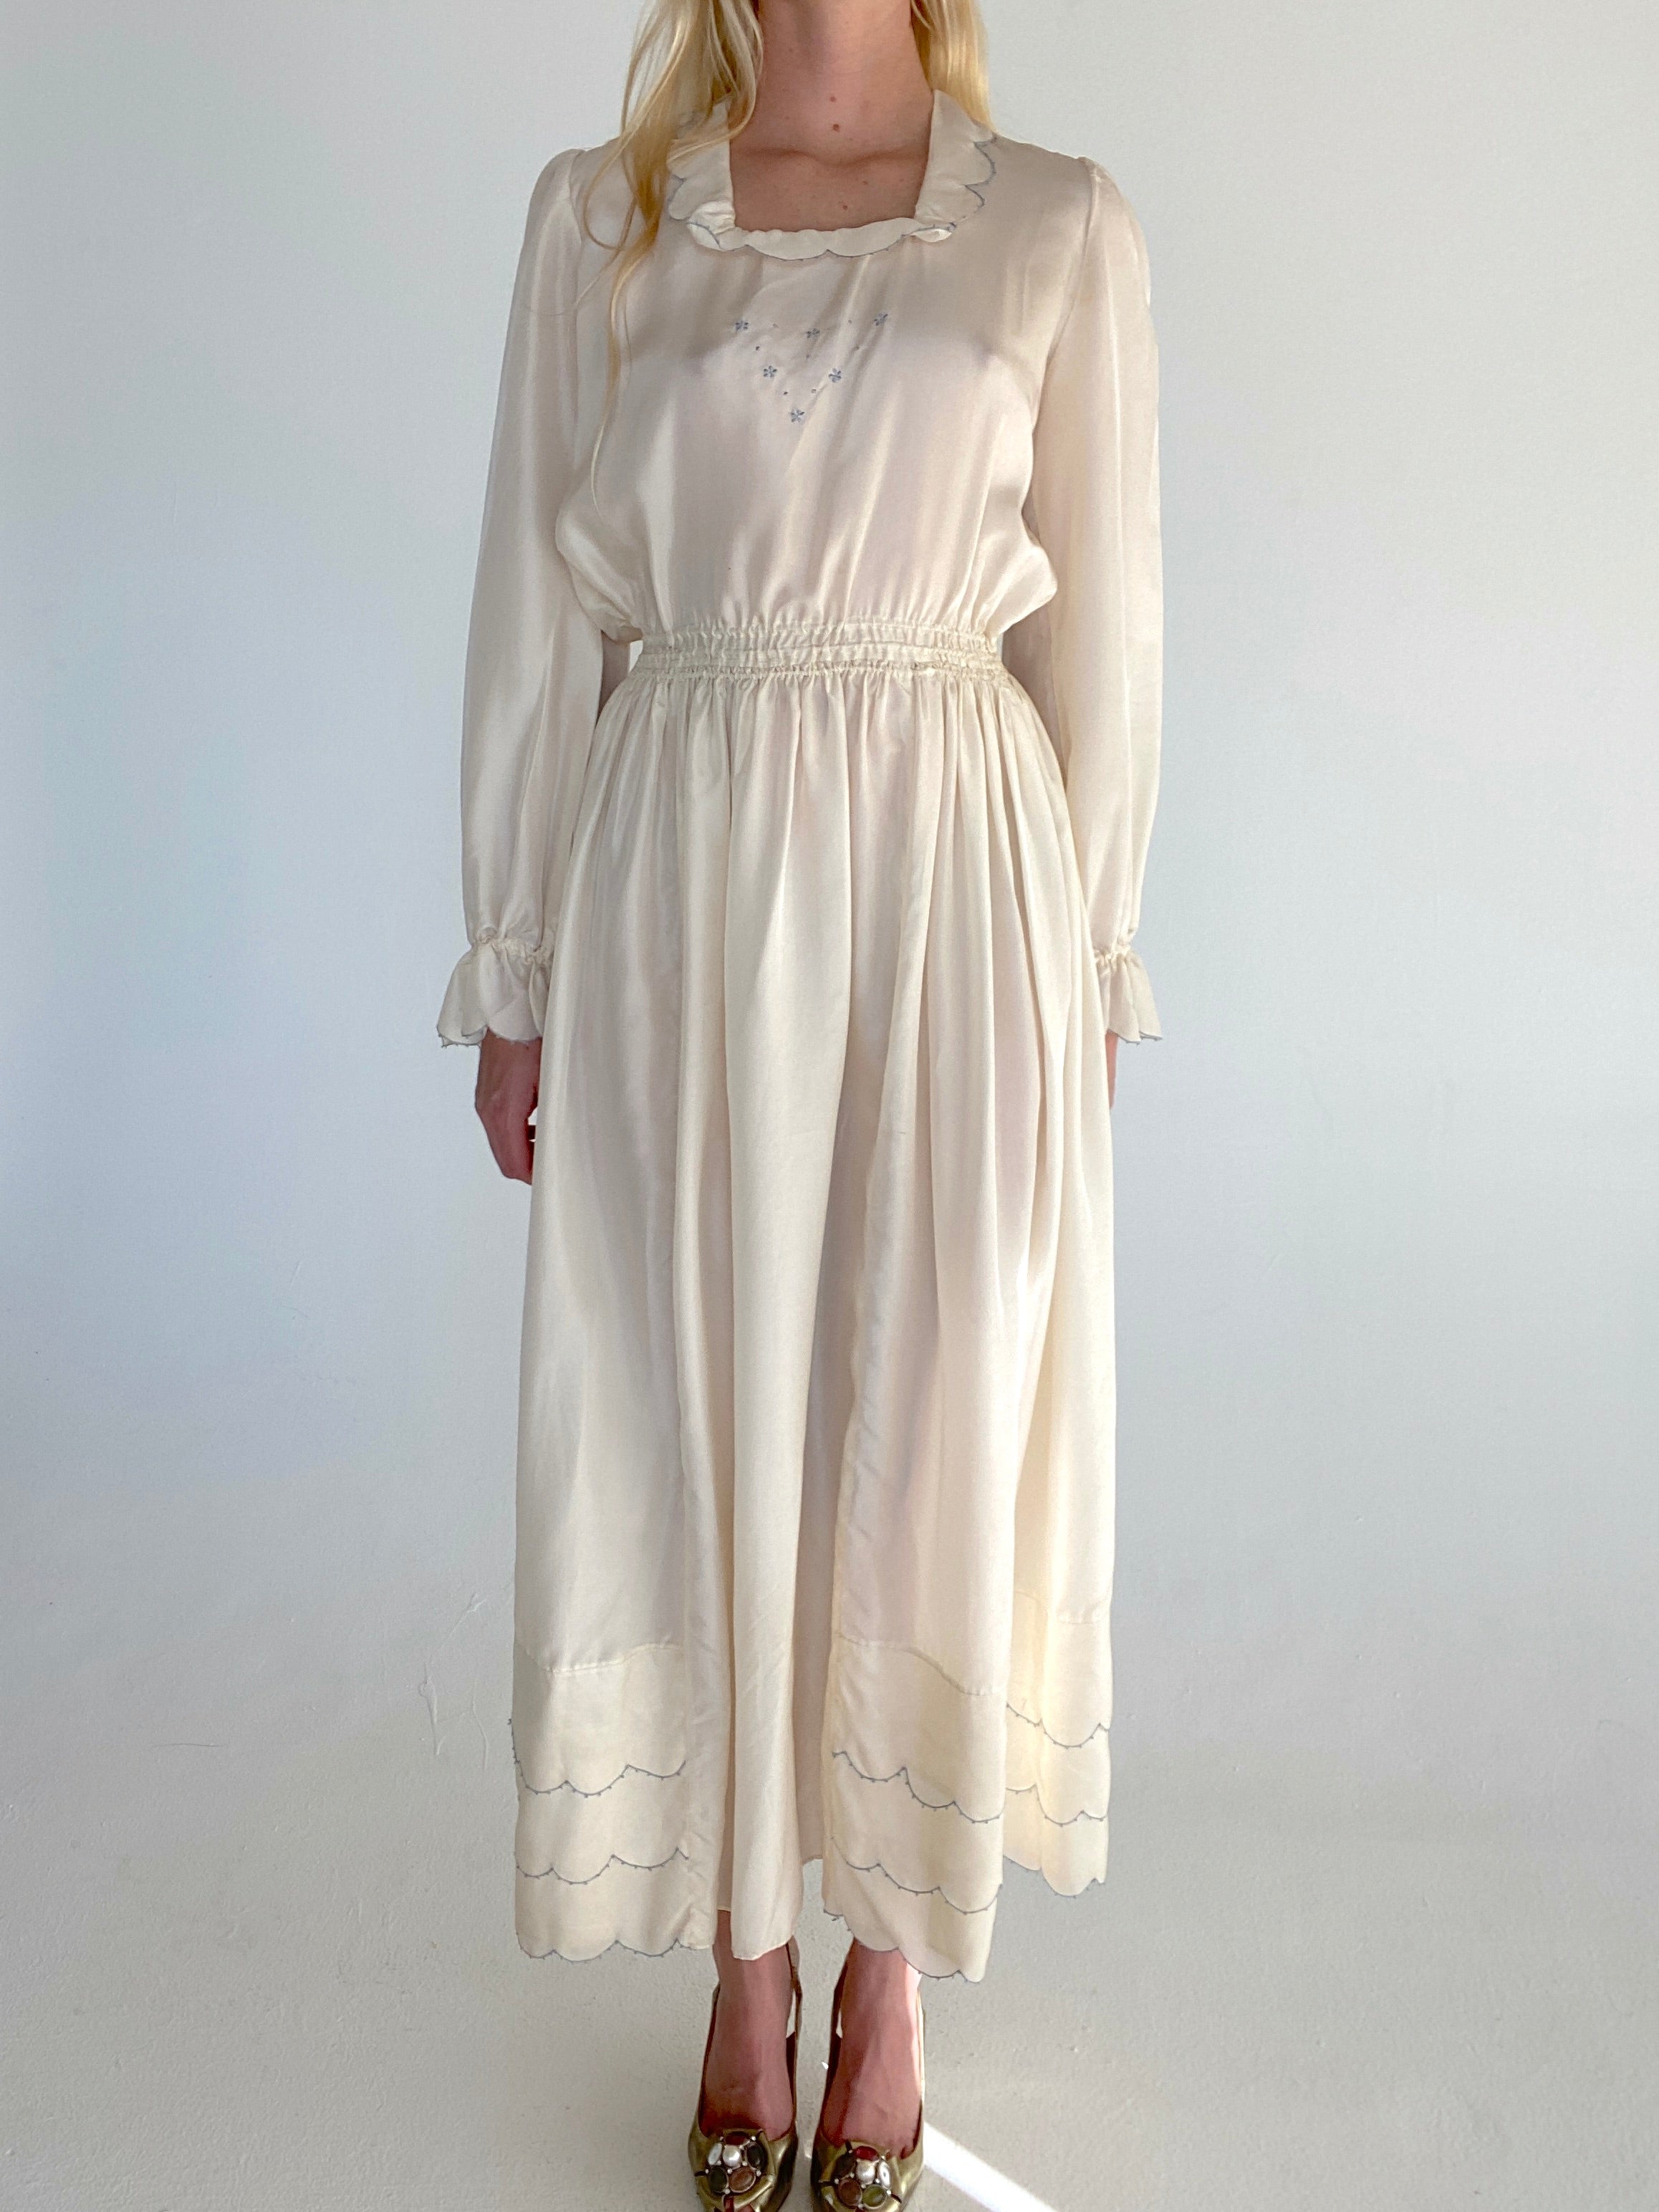 1930's Off White Silk Long Sleeve Dress with Blue Embroidery